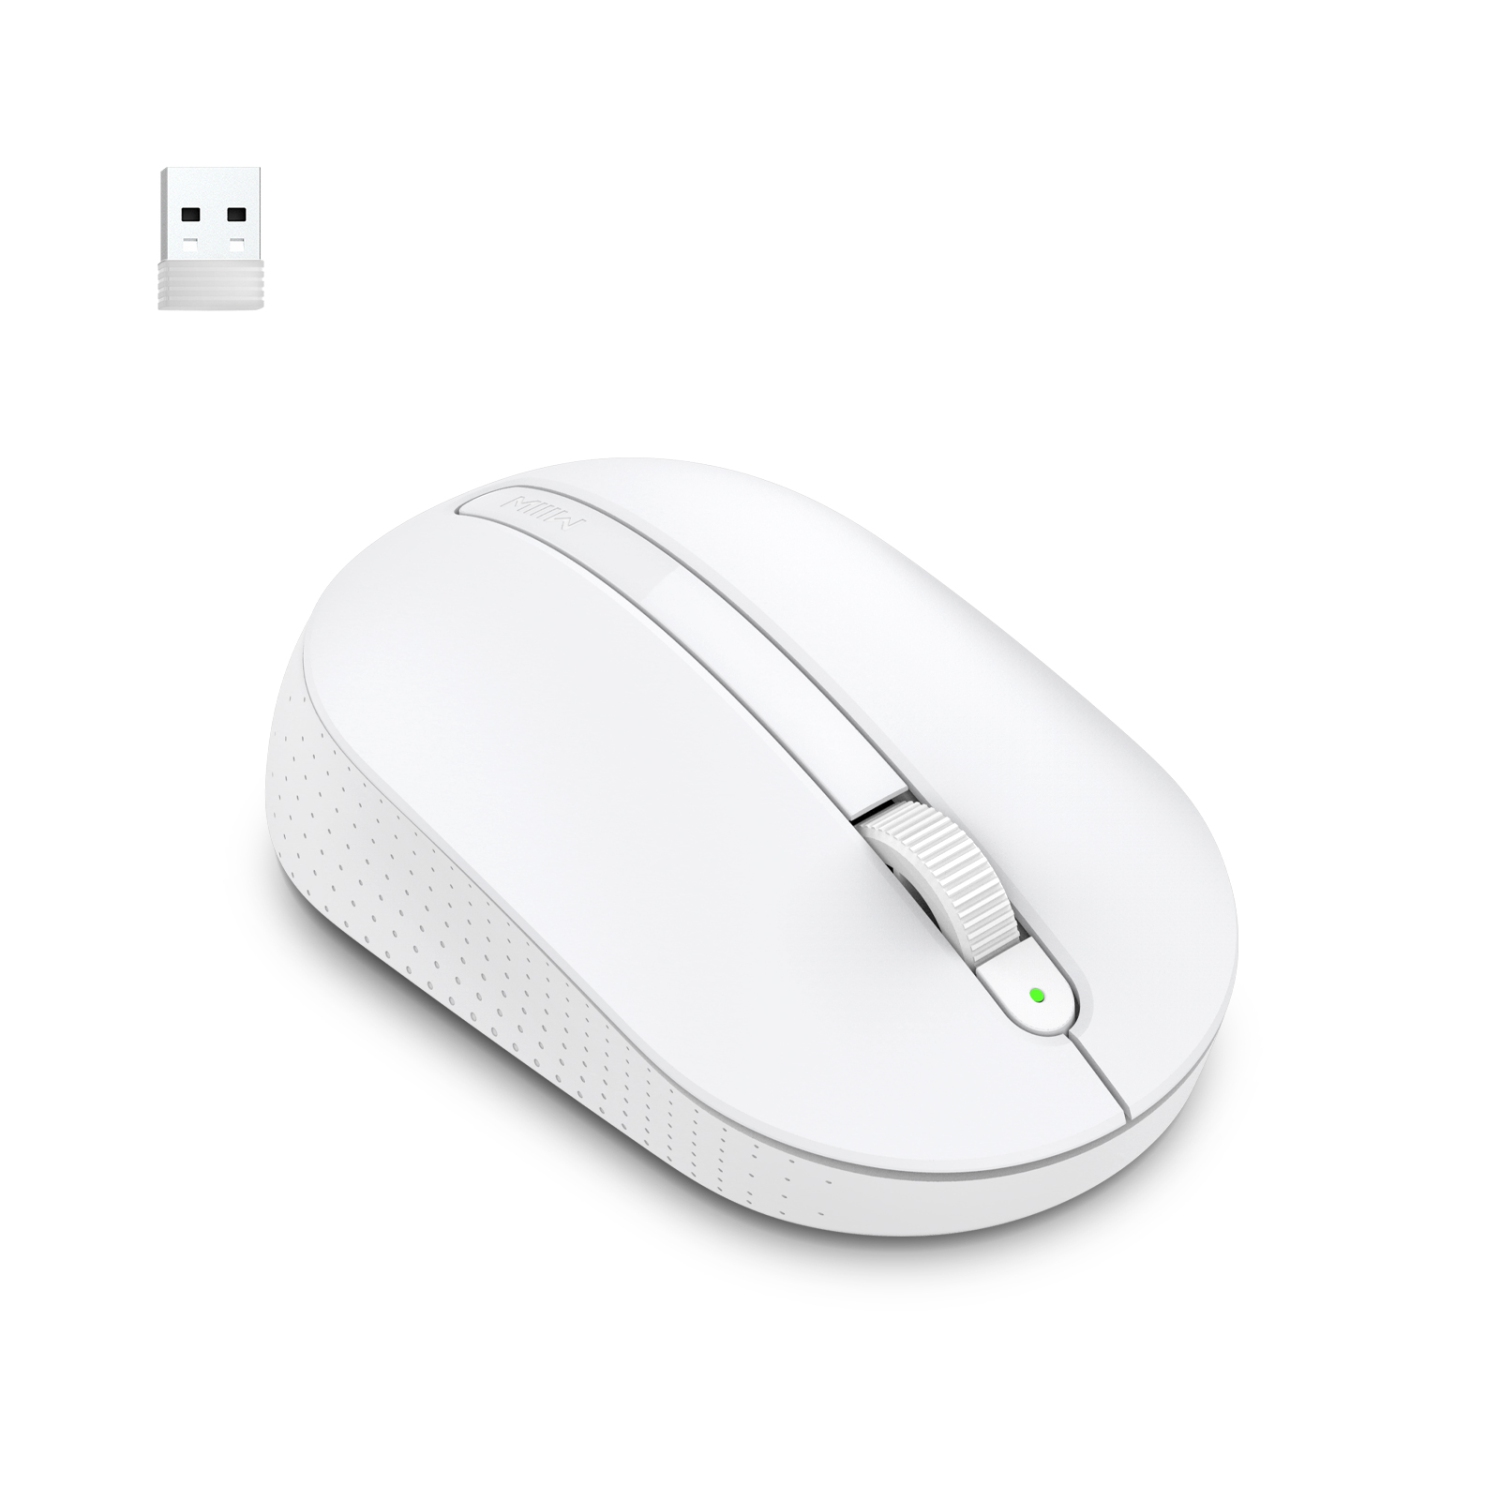 XIAOMI MIIIW M05 Wireless Mouse with USB Nano Receiver, 1000 DPI, Batteries Included, White